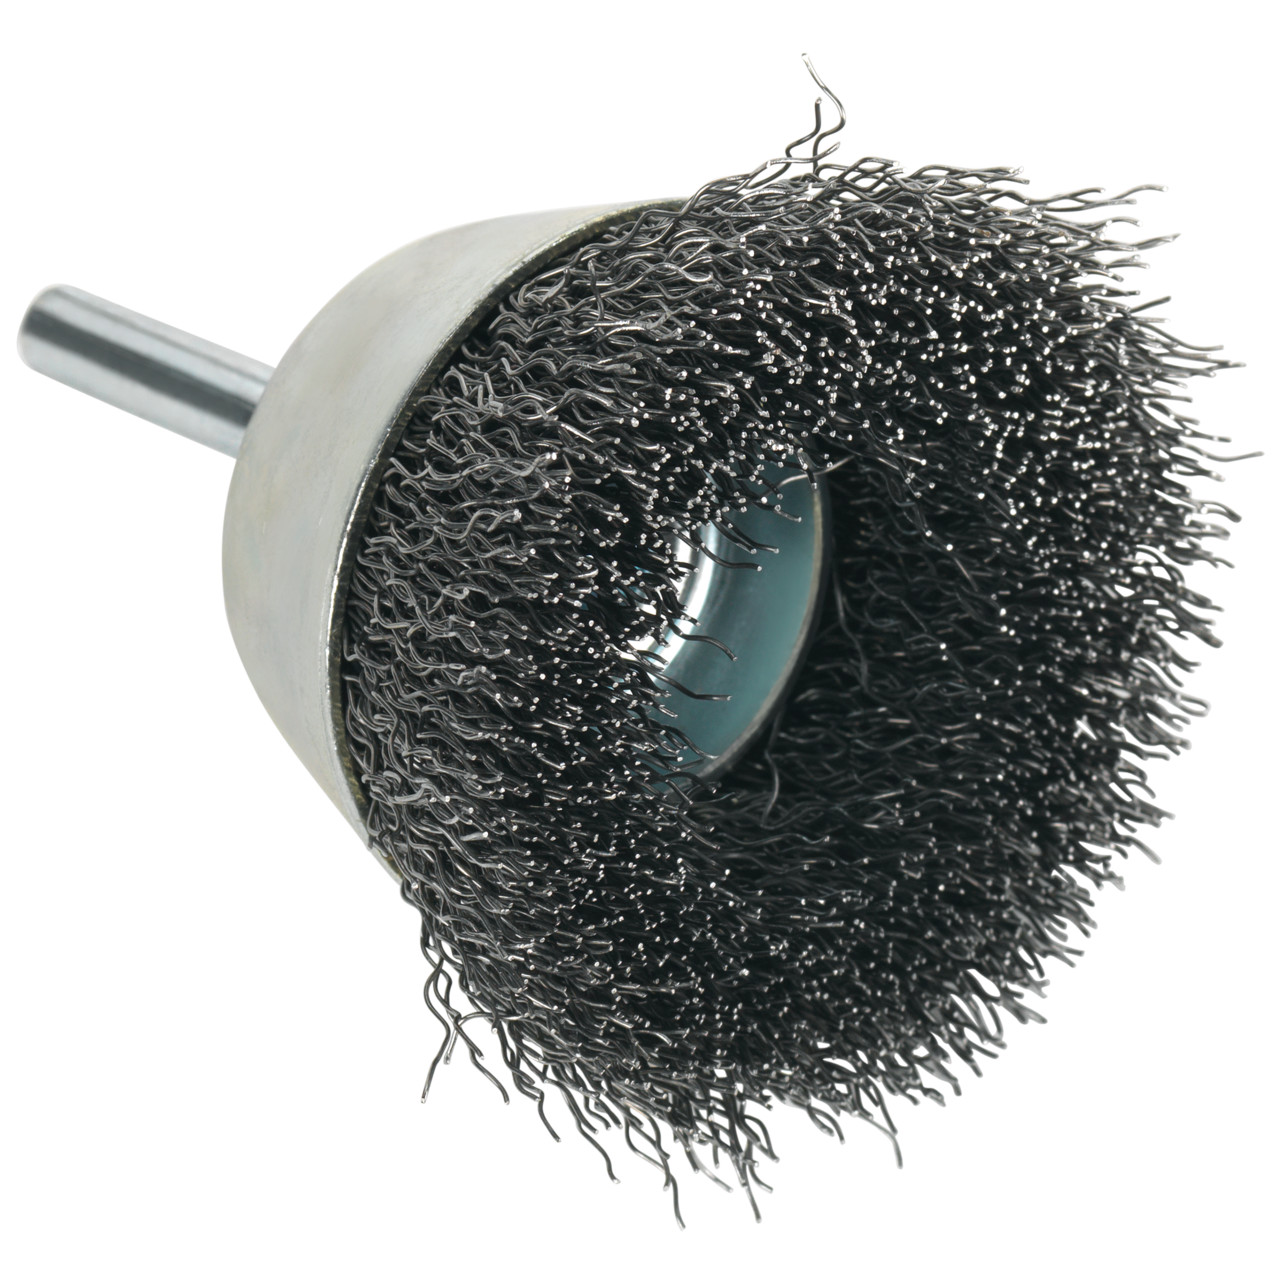 TYROLIT Cup brushes DxLxH-GExI 50x10x20-6x30 For steel, shape: 52TDW - (cup brushes), Art. 34043171